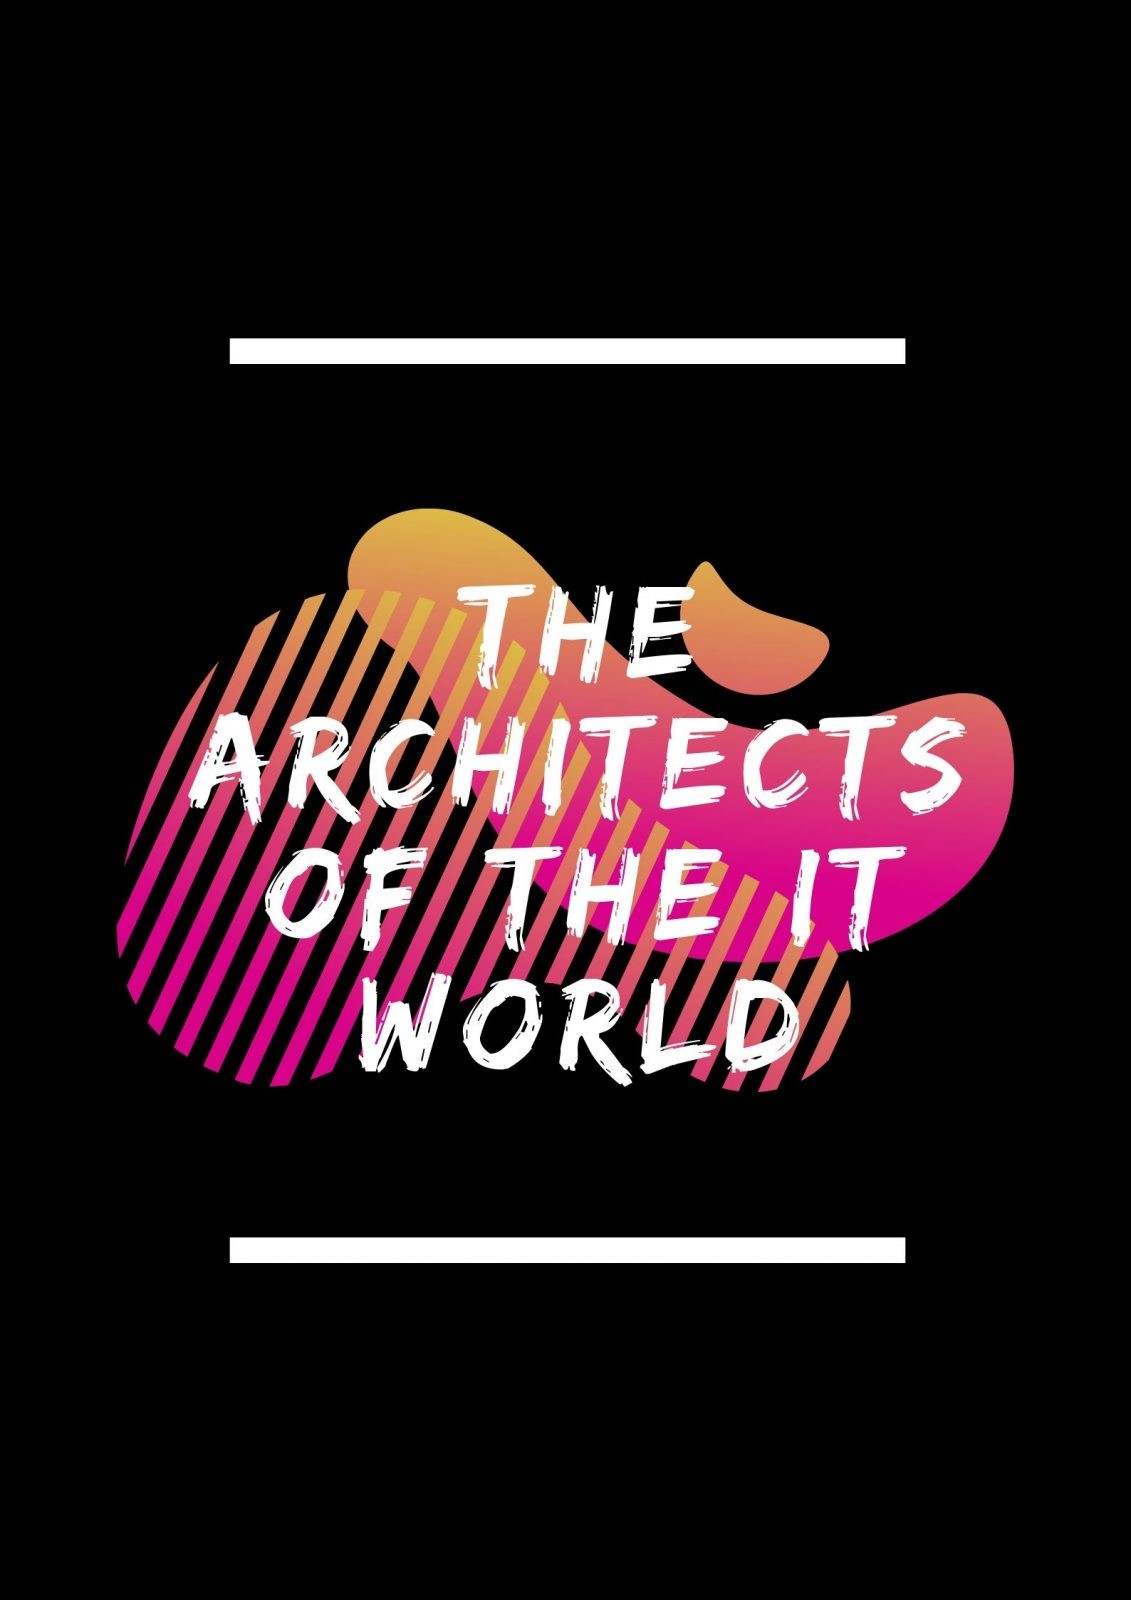 The Architects of the IT world